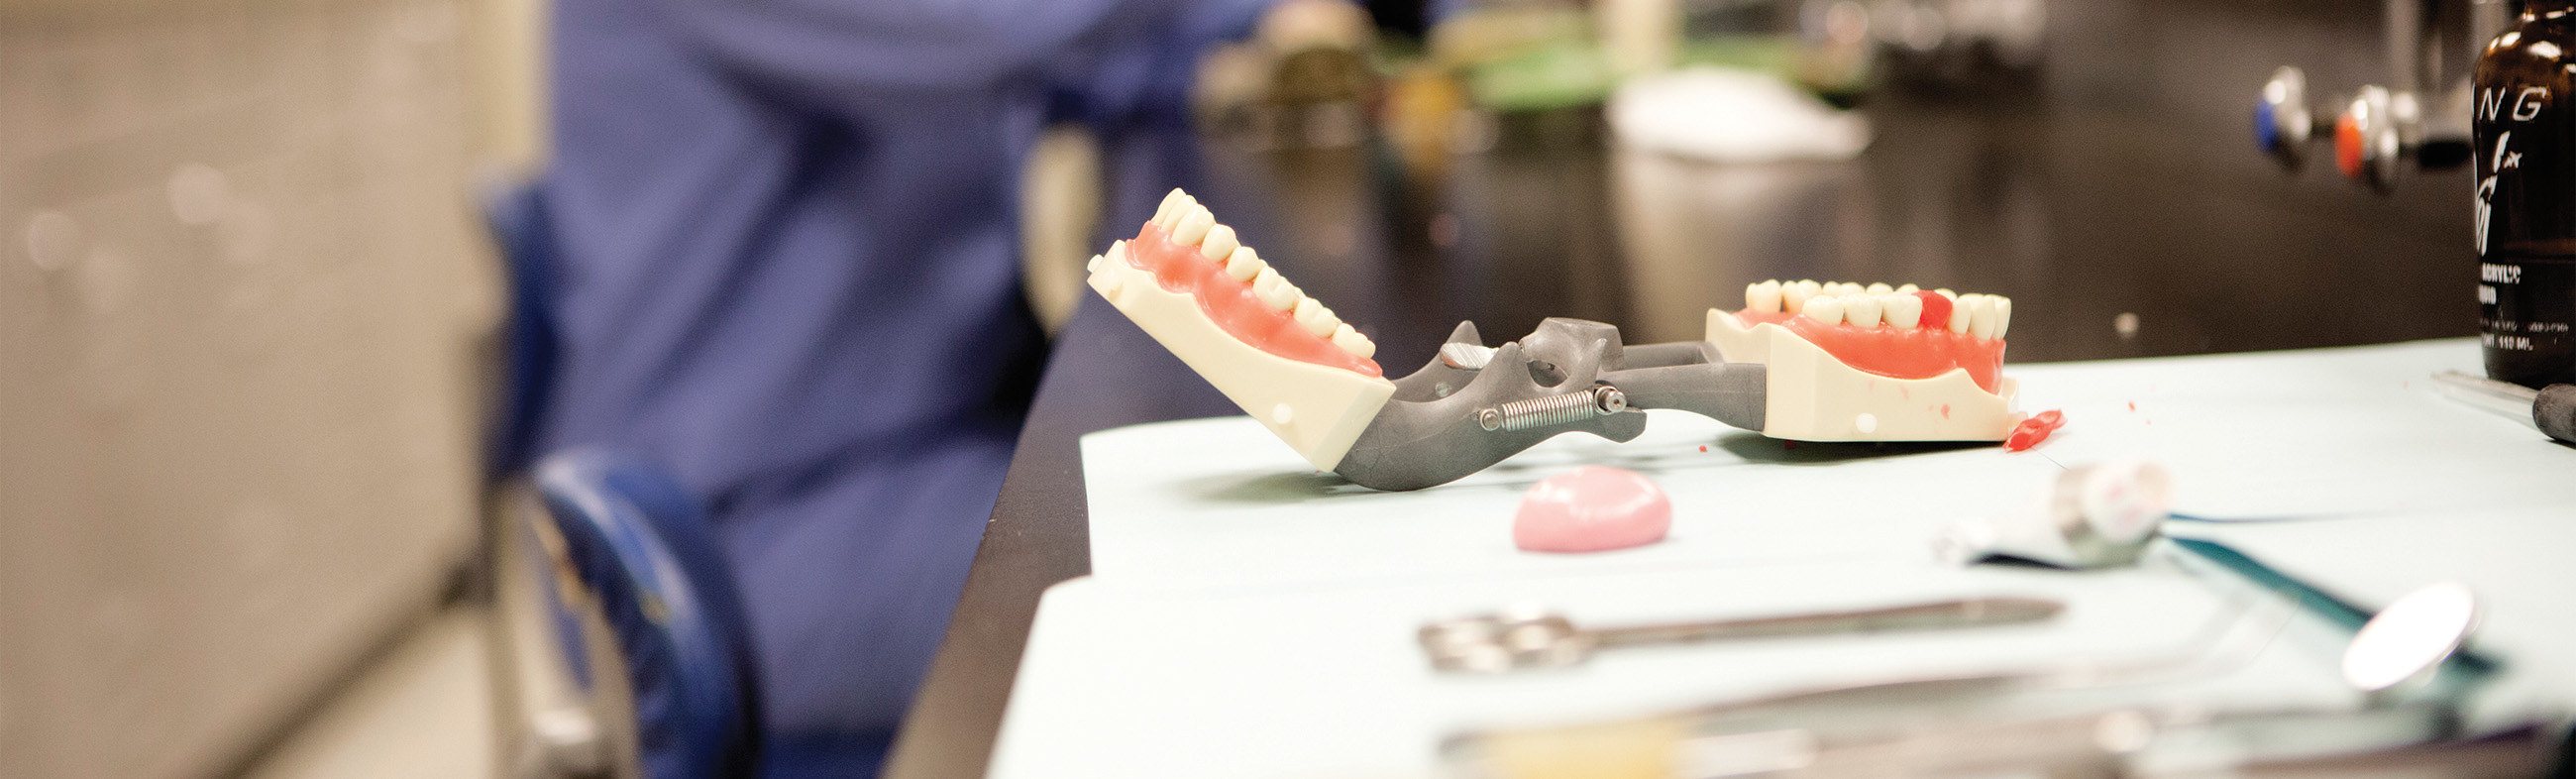 Dental devices for training students.